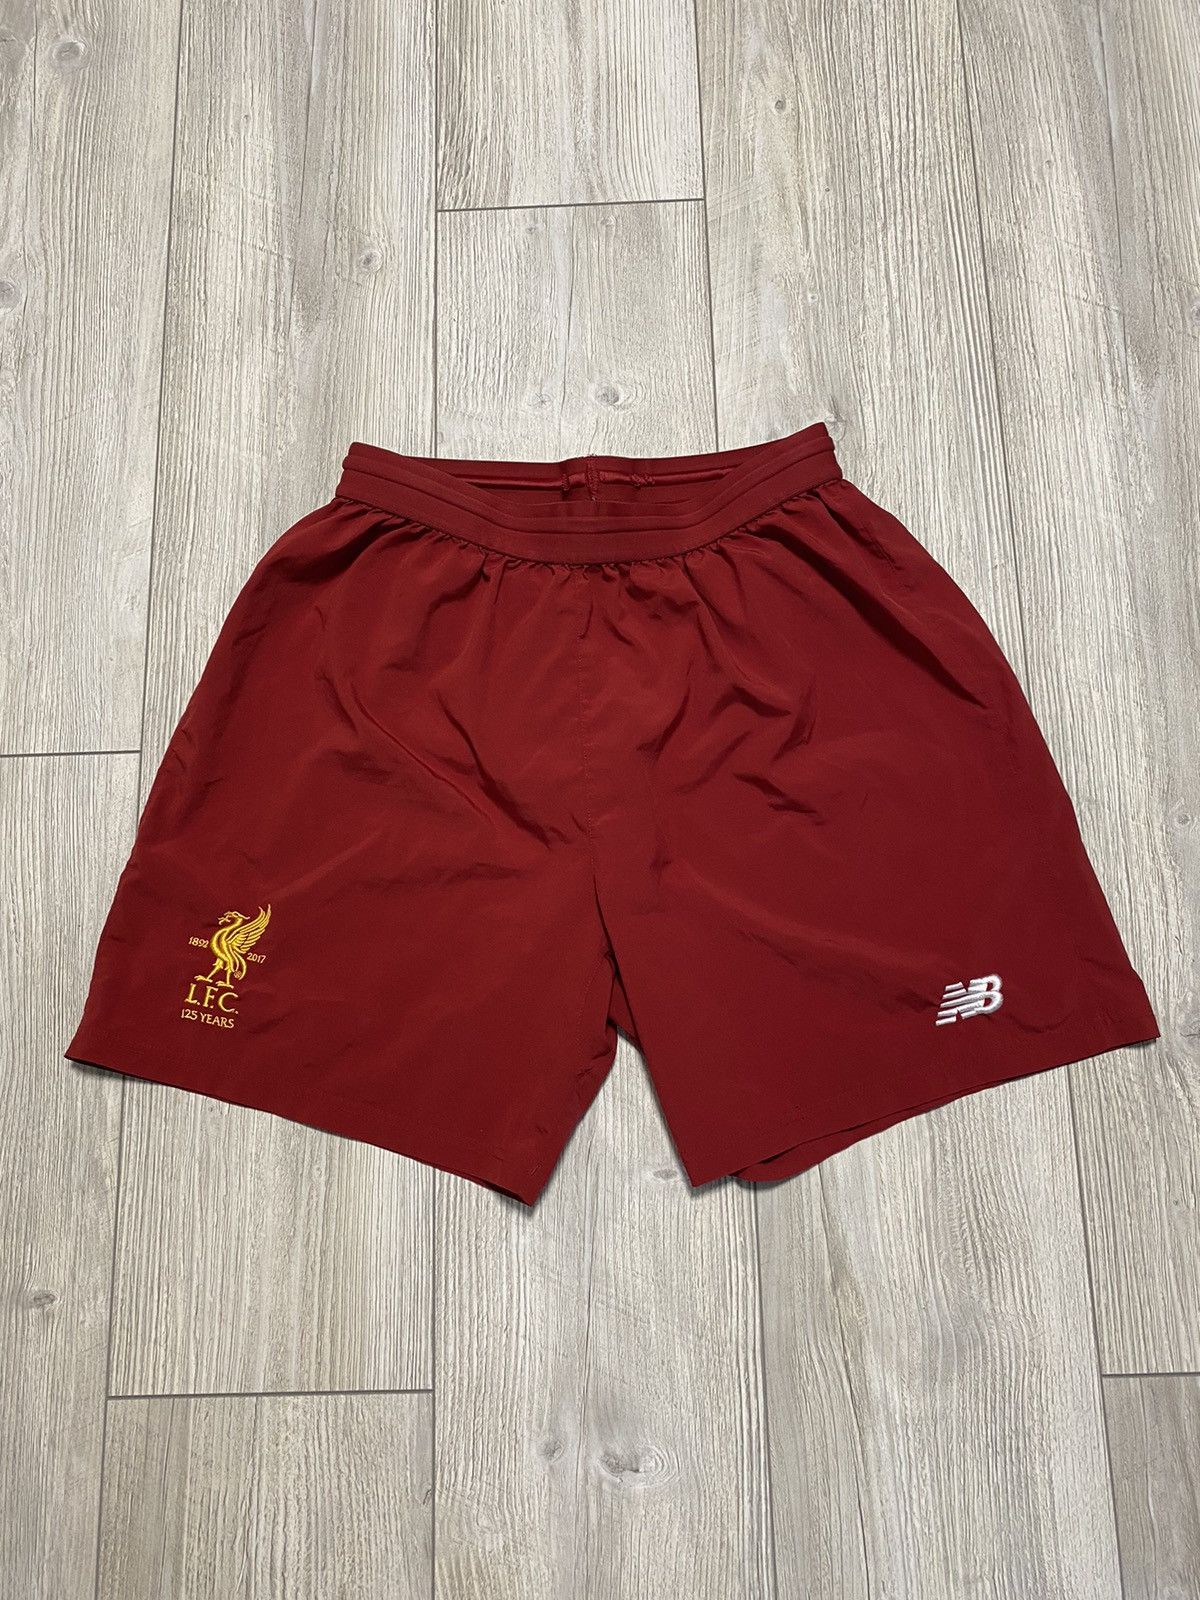 Pre-owned Liverpool X New Balance 2017 2018 Liverpool England New Balance Away Soccer Shorts In Red